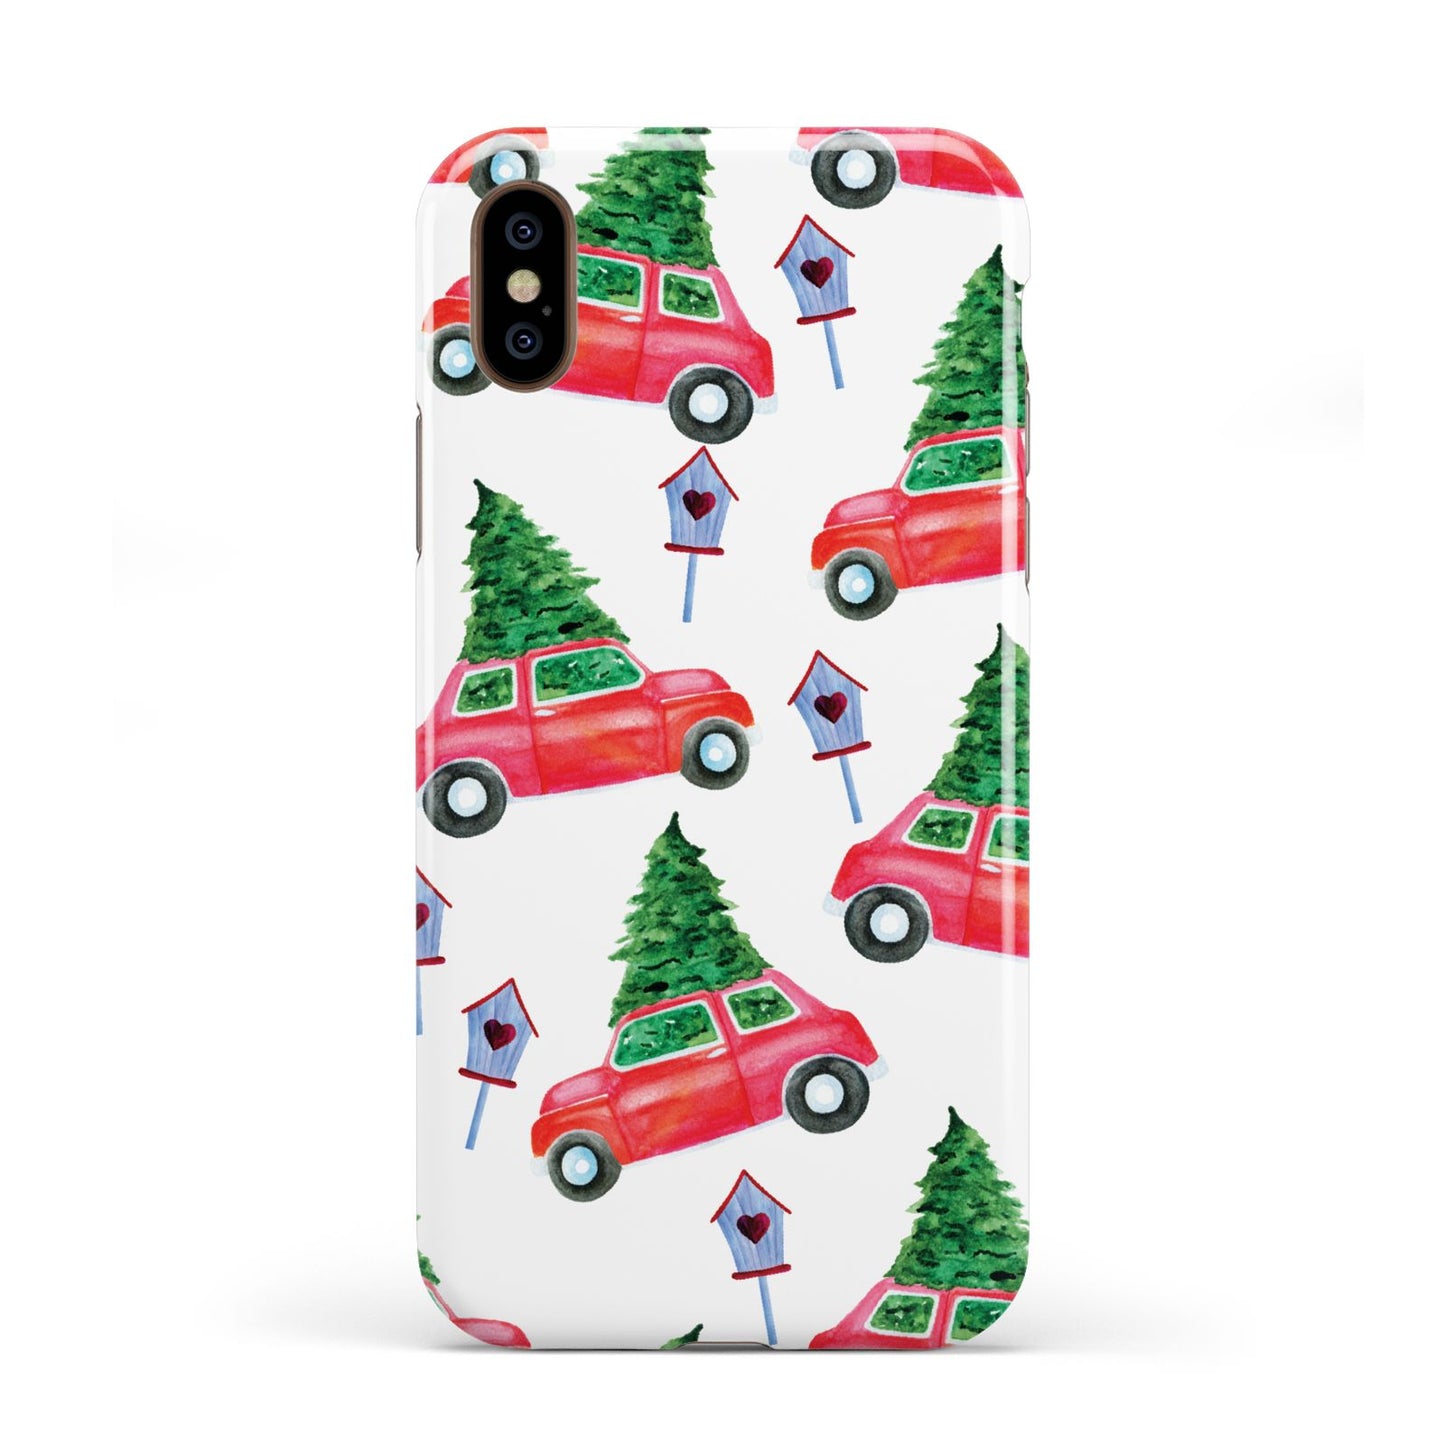 Driving home for Christmas Apple iPhone XS 3D Tough